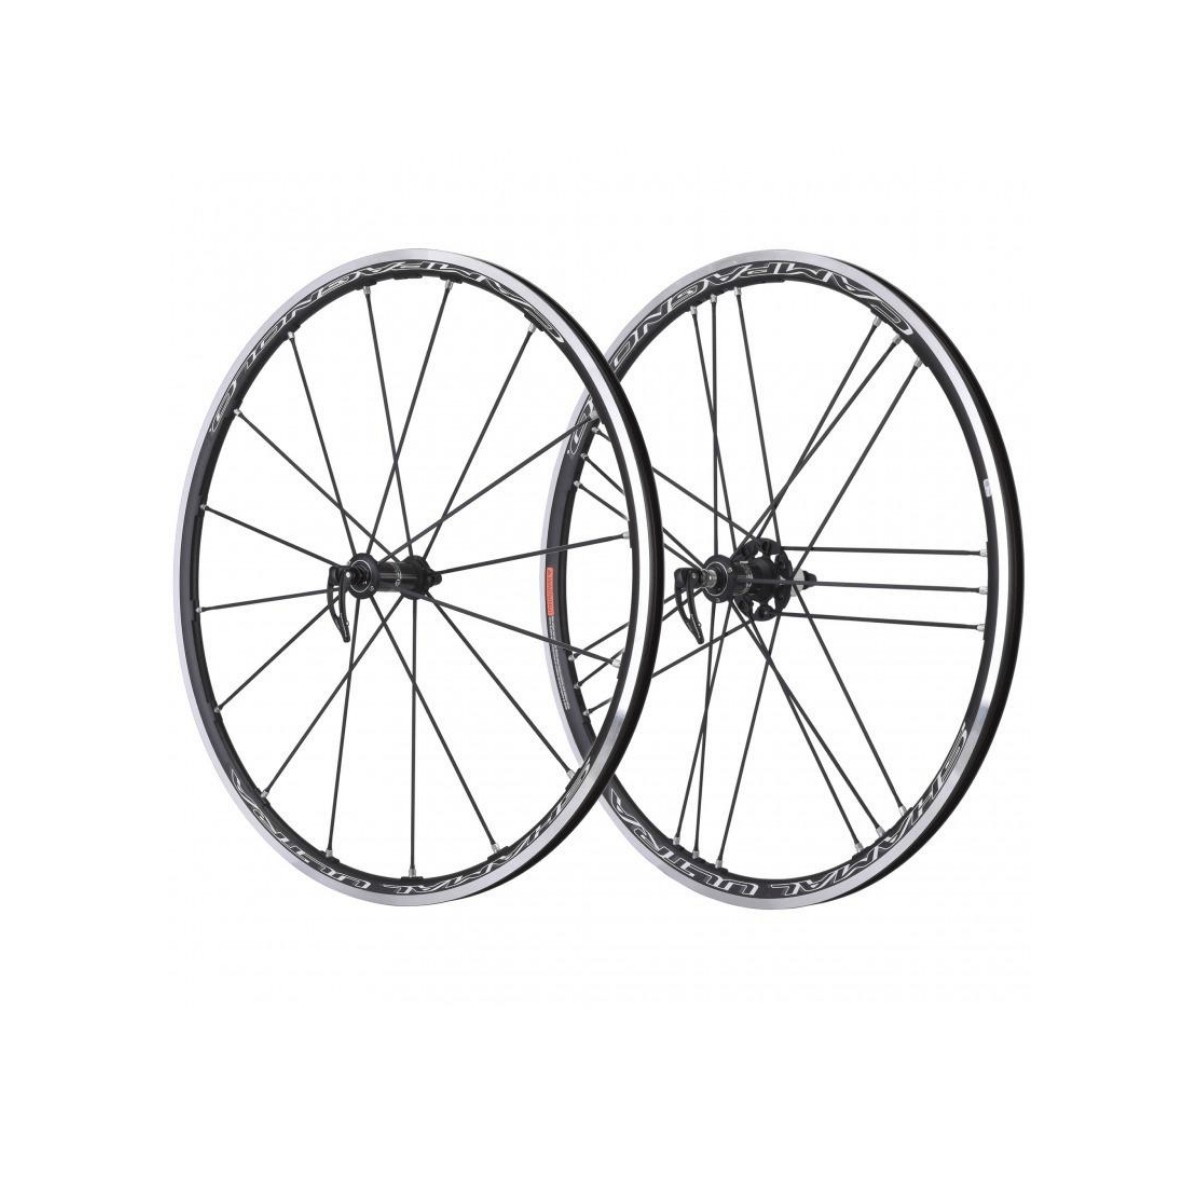 Photos - Bike Wheel Campаgnolo Campagnolo Shamal Ultra C17 2Way-Fit Wheelset, Groups Campagnolo WH17-SH2F 